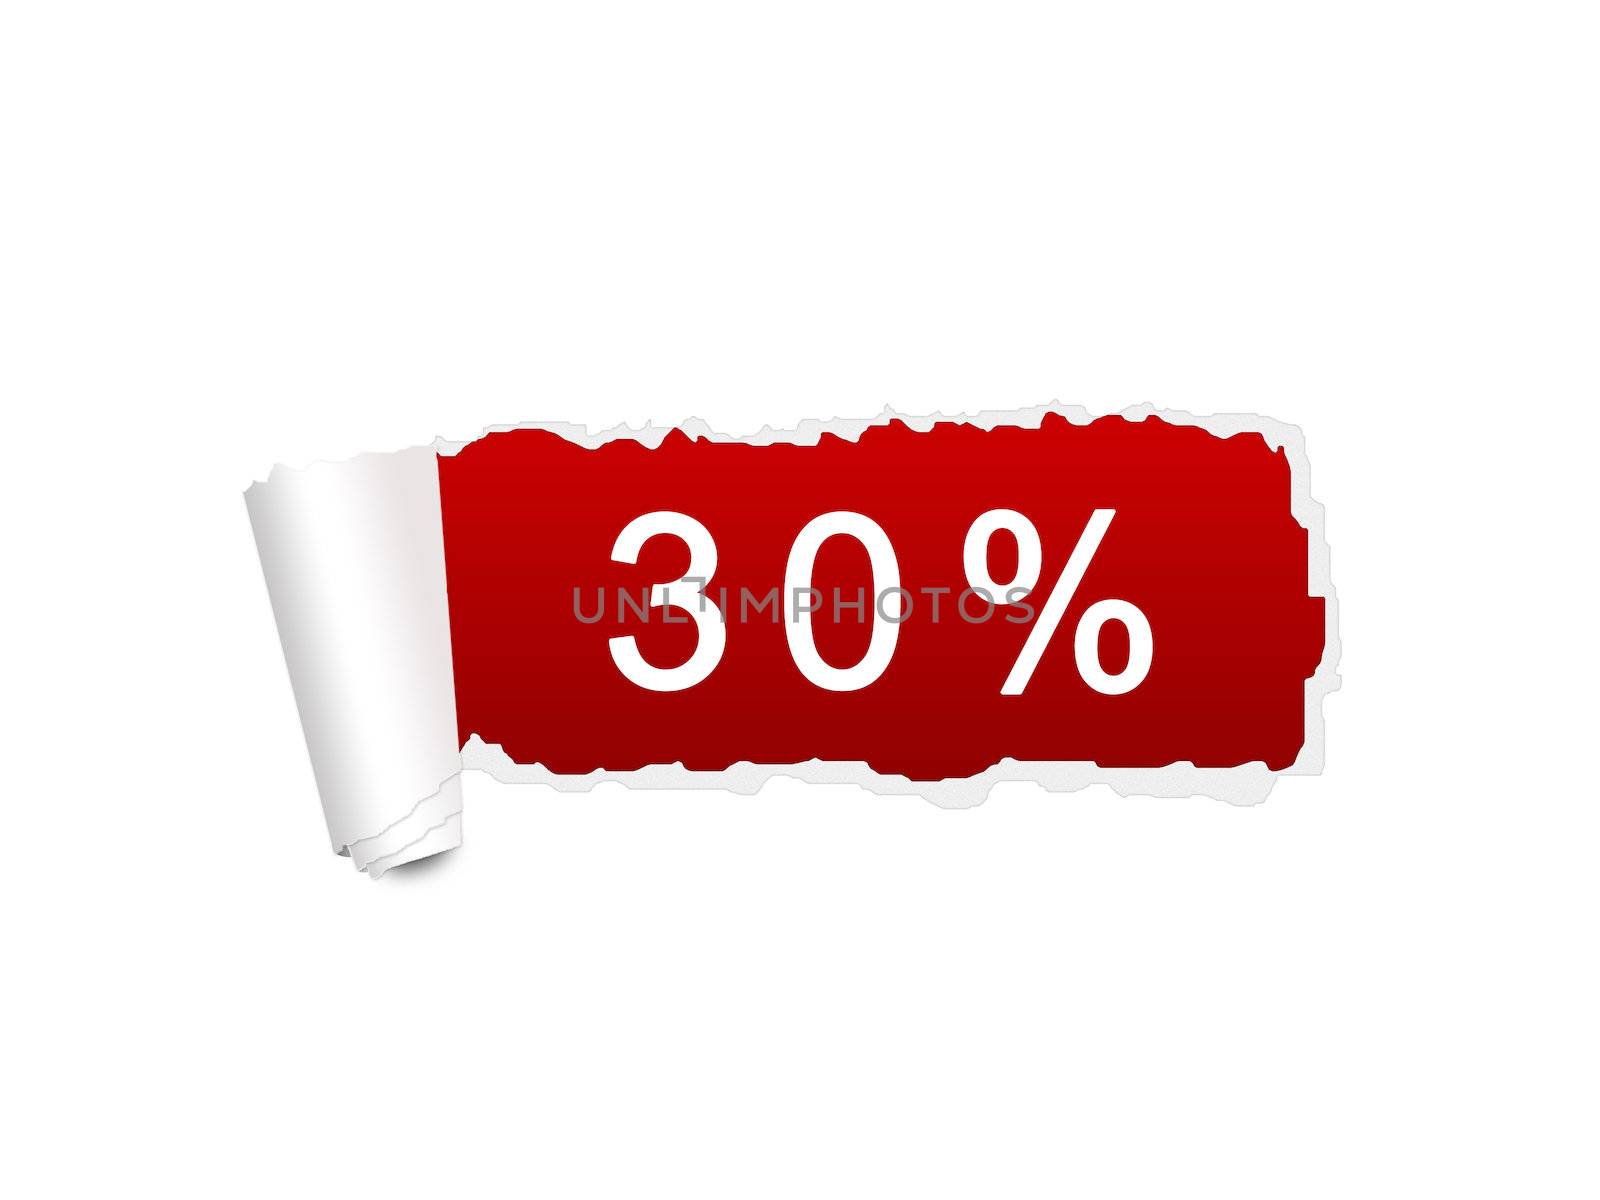 30 % discount sale on the ripped paper background by Dddaca